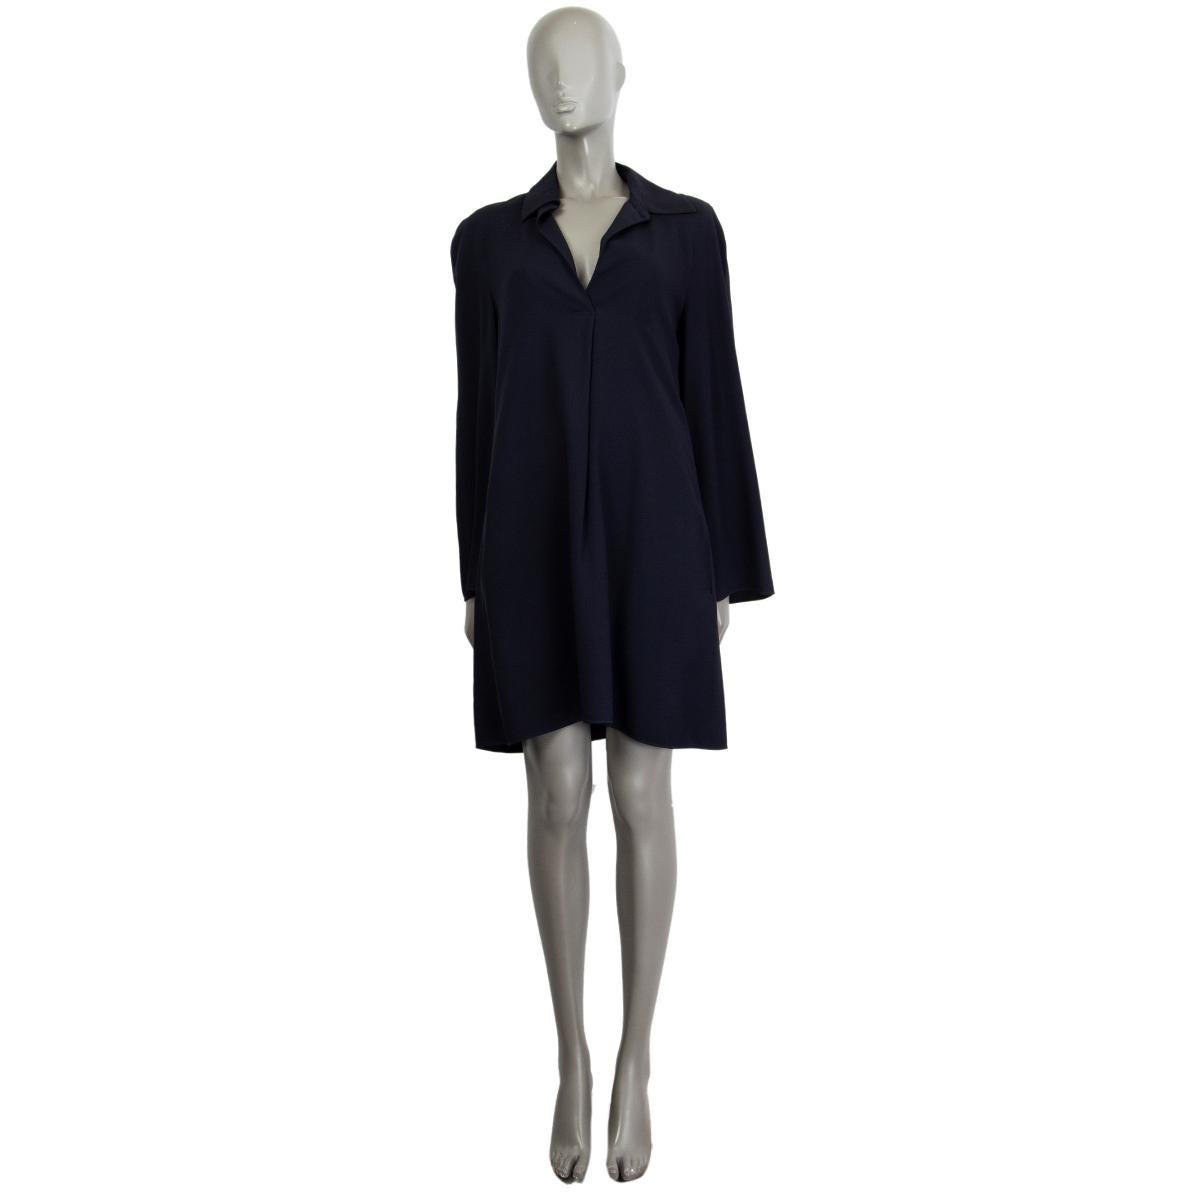 100% authentic Chloe wide shirt dress in navy acetate (53%) viscose (47%) with a floaty fabric, V-neck, point collar, long trumpet-sleeves and two slit-pockets on both sides at the hips. Lined in navy fabric silk (100%). The dress usually comes with